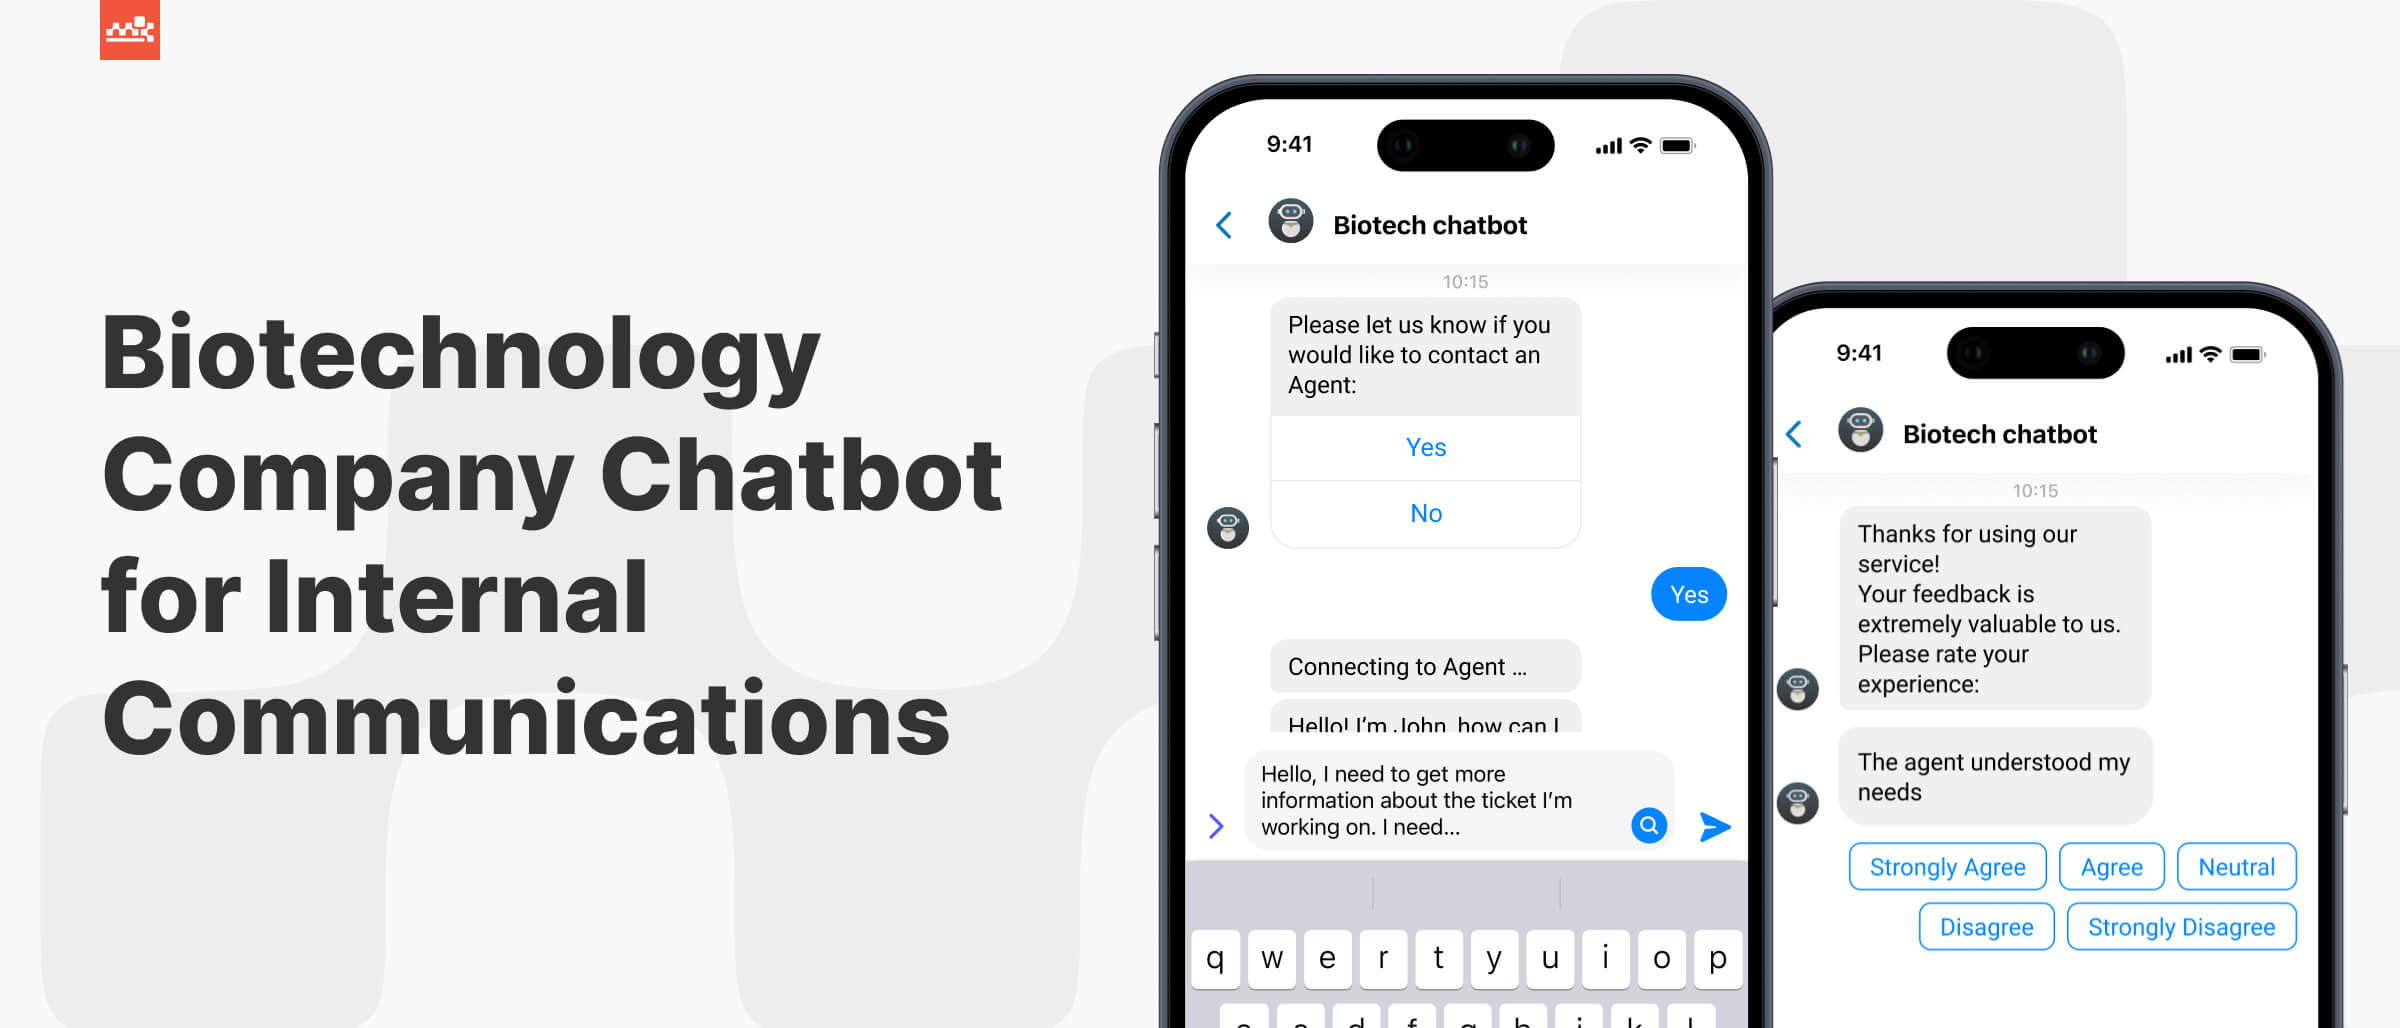 Biotechnology Company Chatbot for Internal Communications